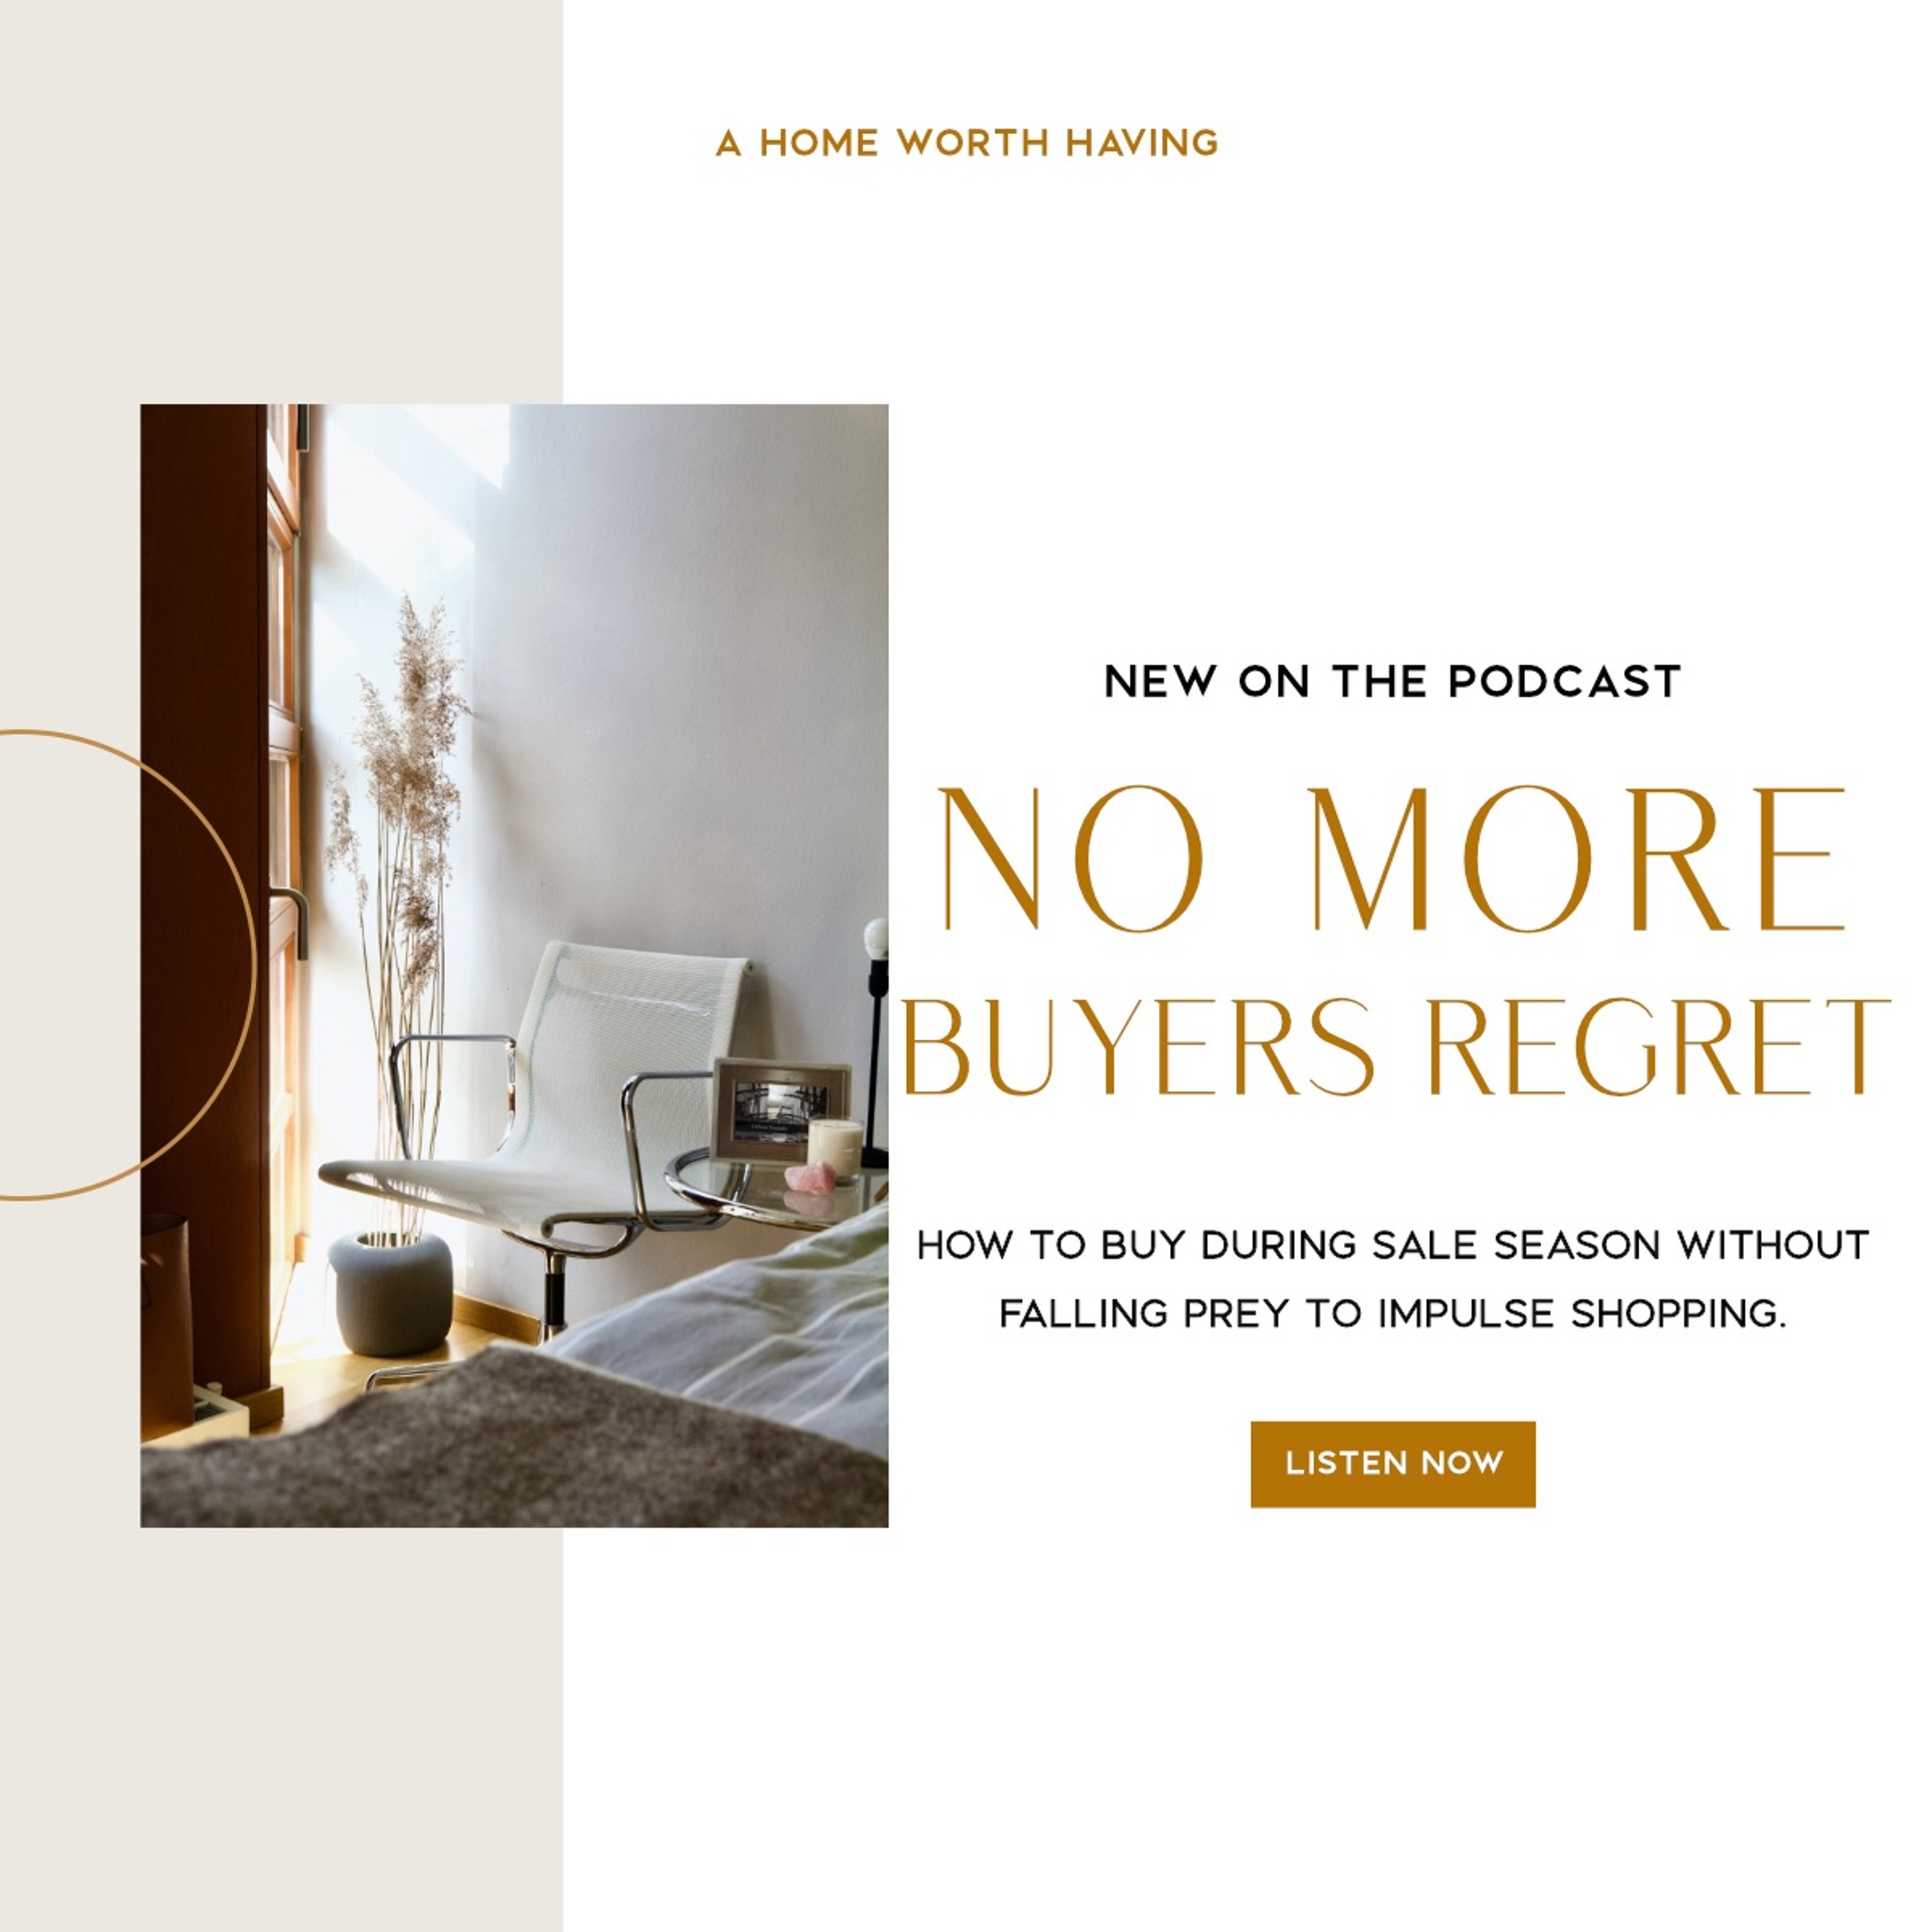 No more Buyers Regret - how to buy during sale season without impulse shopping and overspending